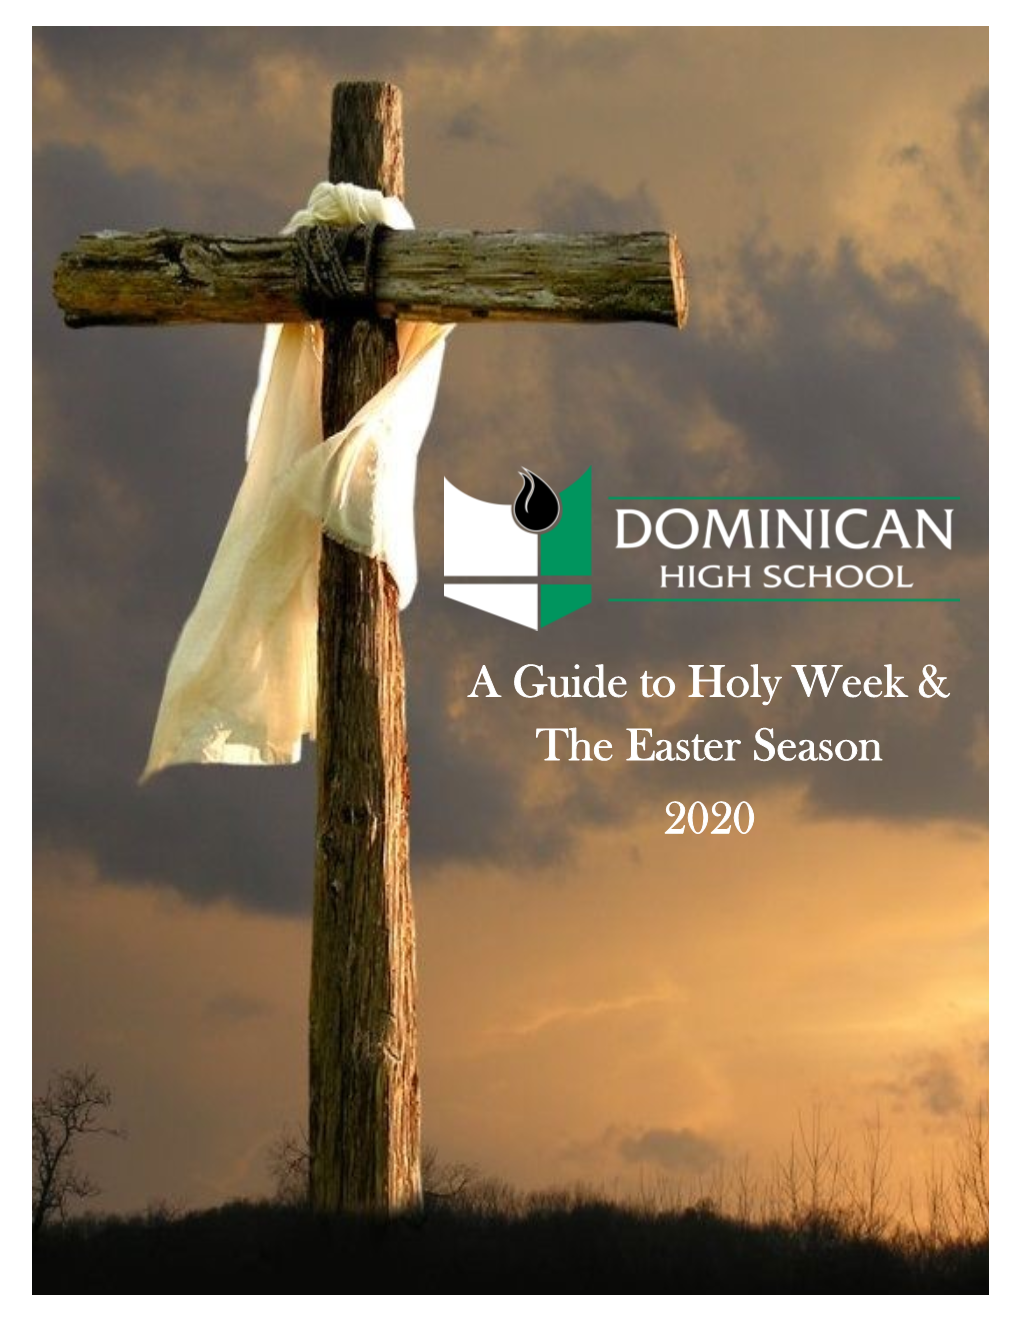 A Guide to Holy Week & the Easter Season 2020